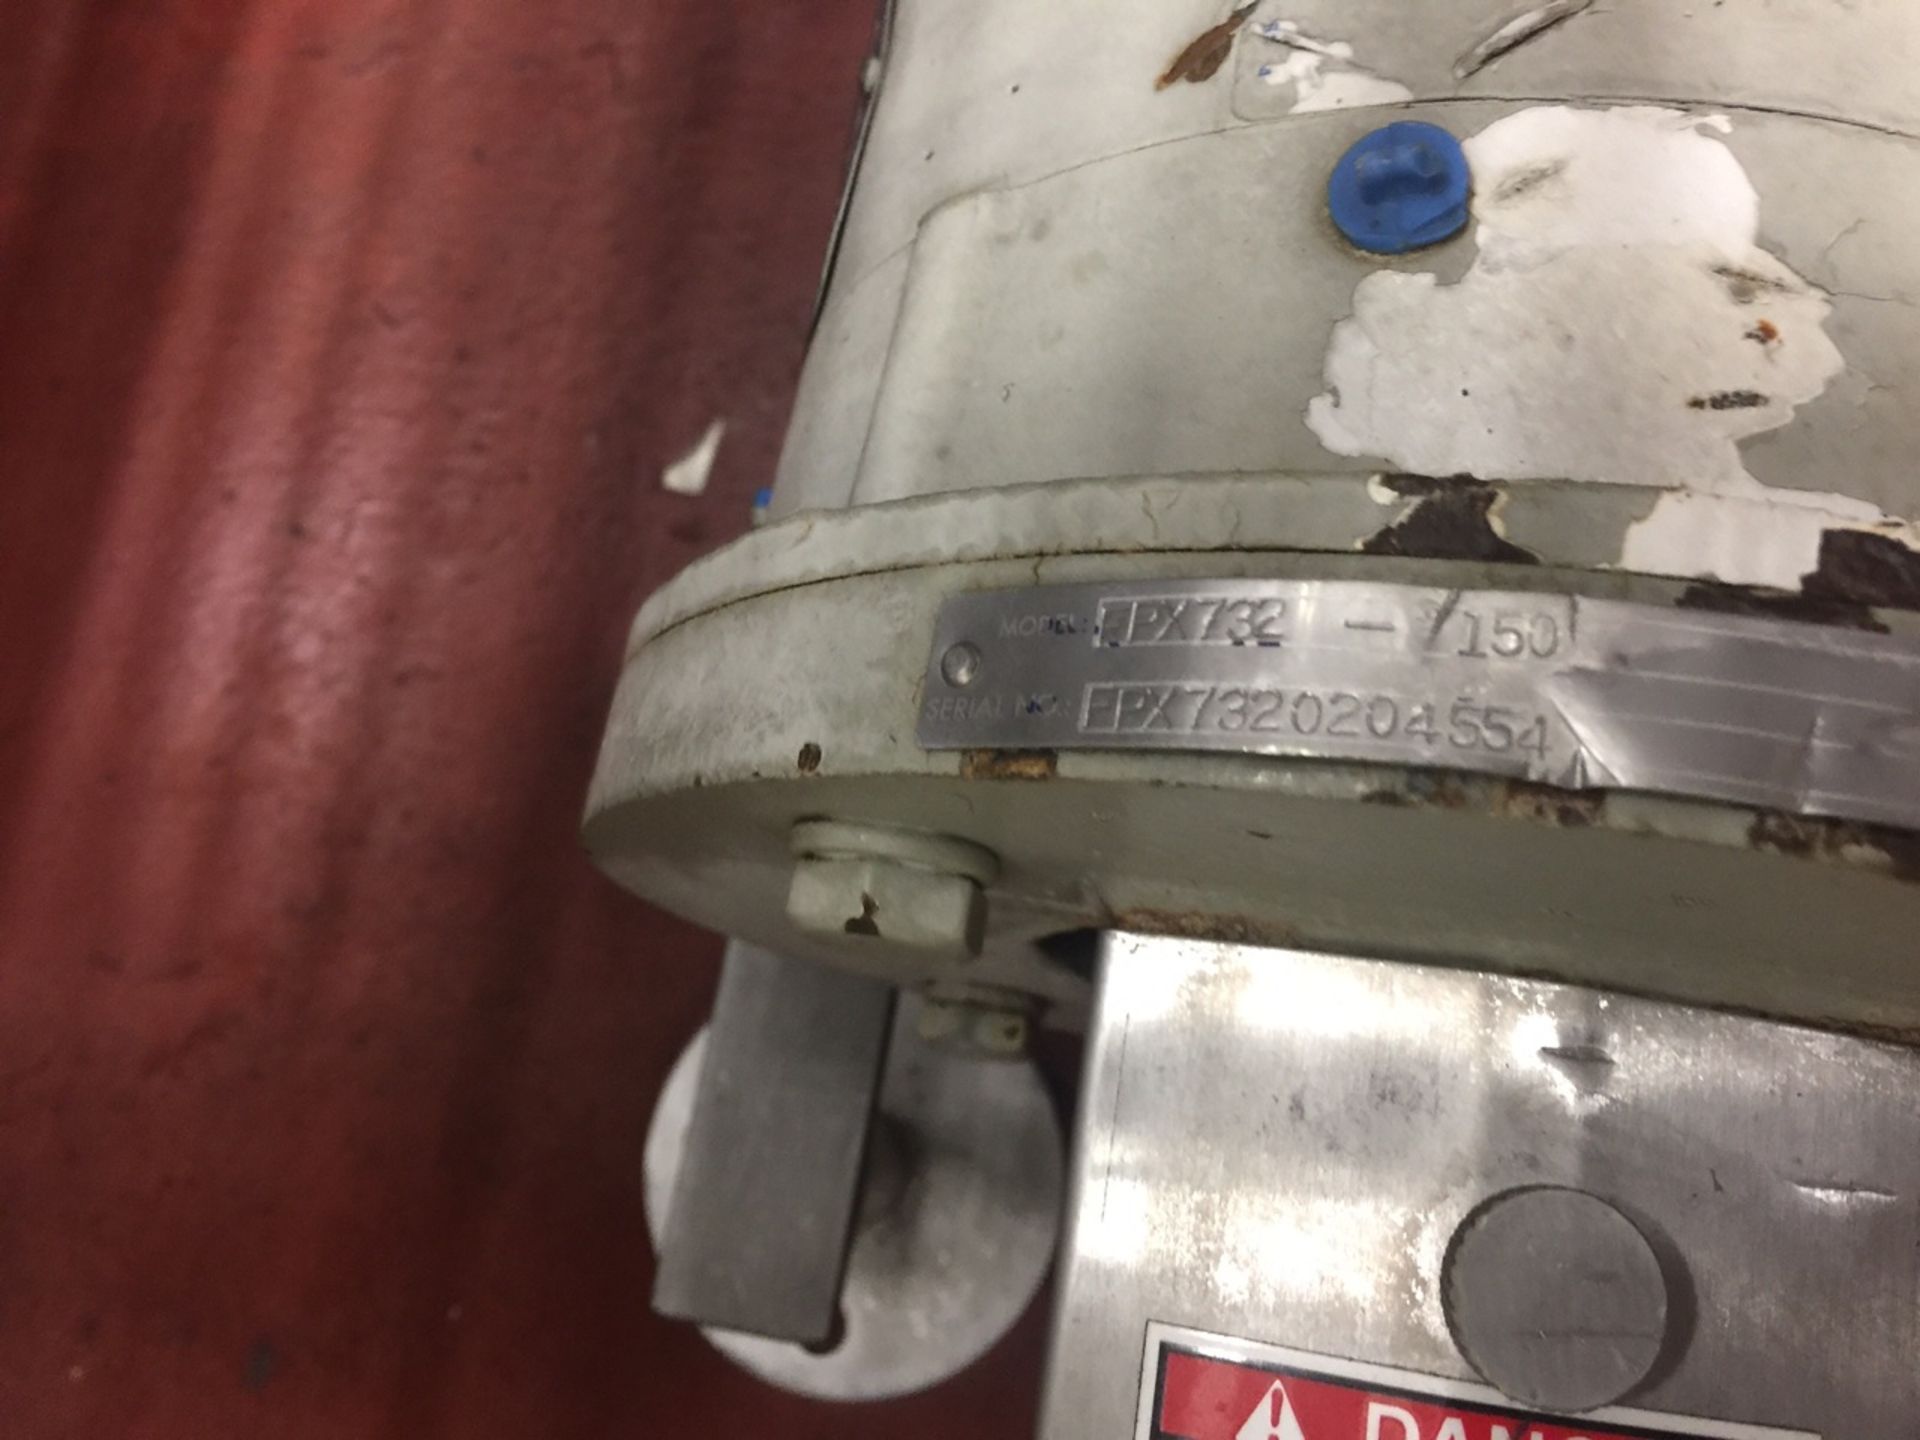 Fristam 7.5 HP Sanitary Centrifugal Pump Model FPX732-150, S/N FPX7320204554 | Rigging Price: $50 - Image 2 of 3